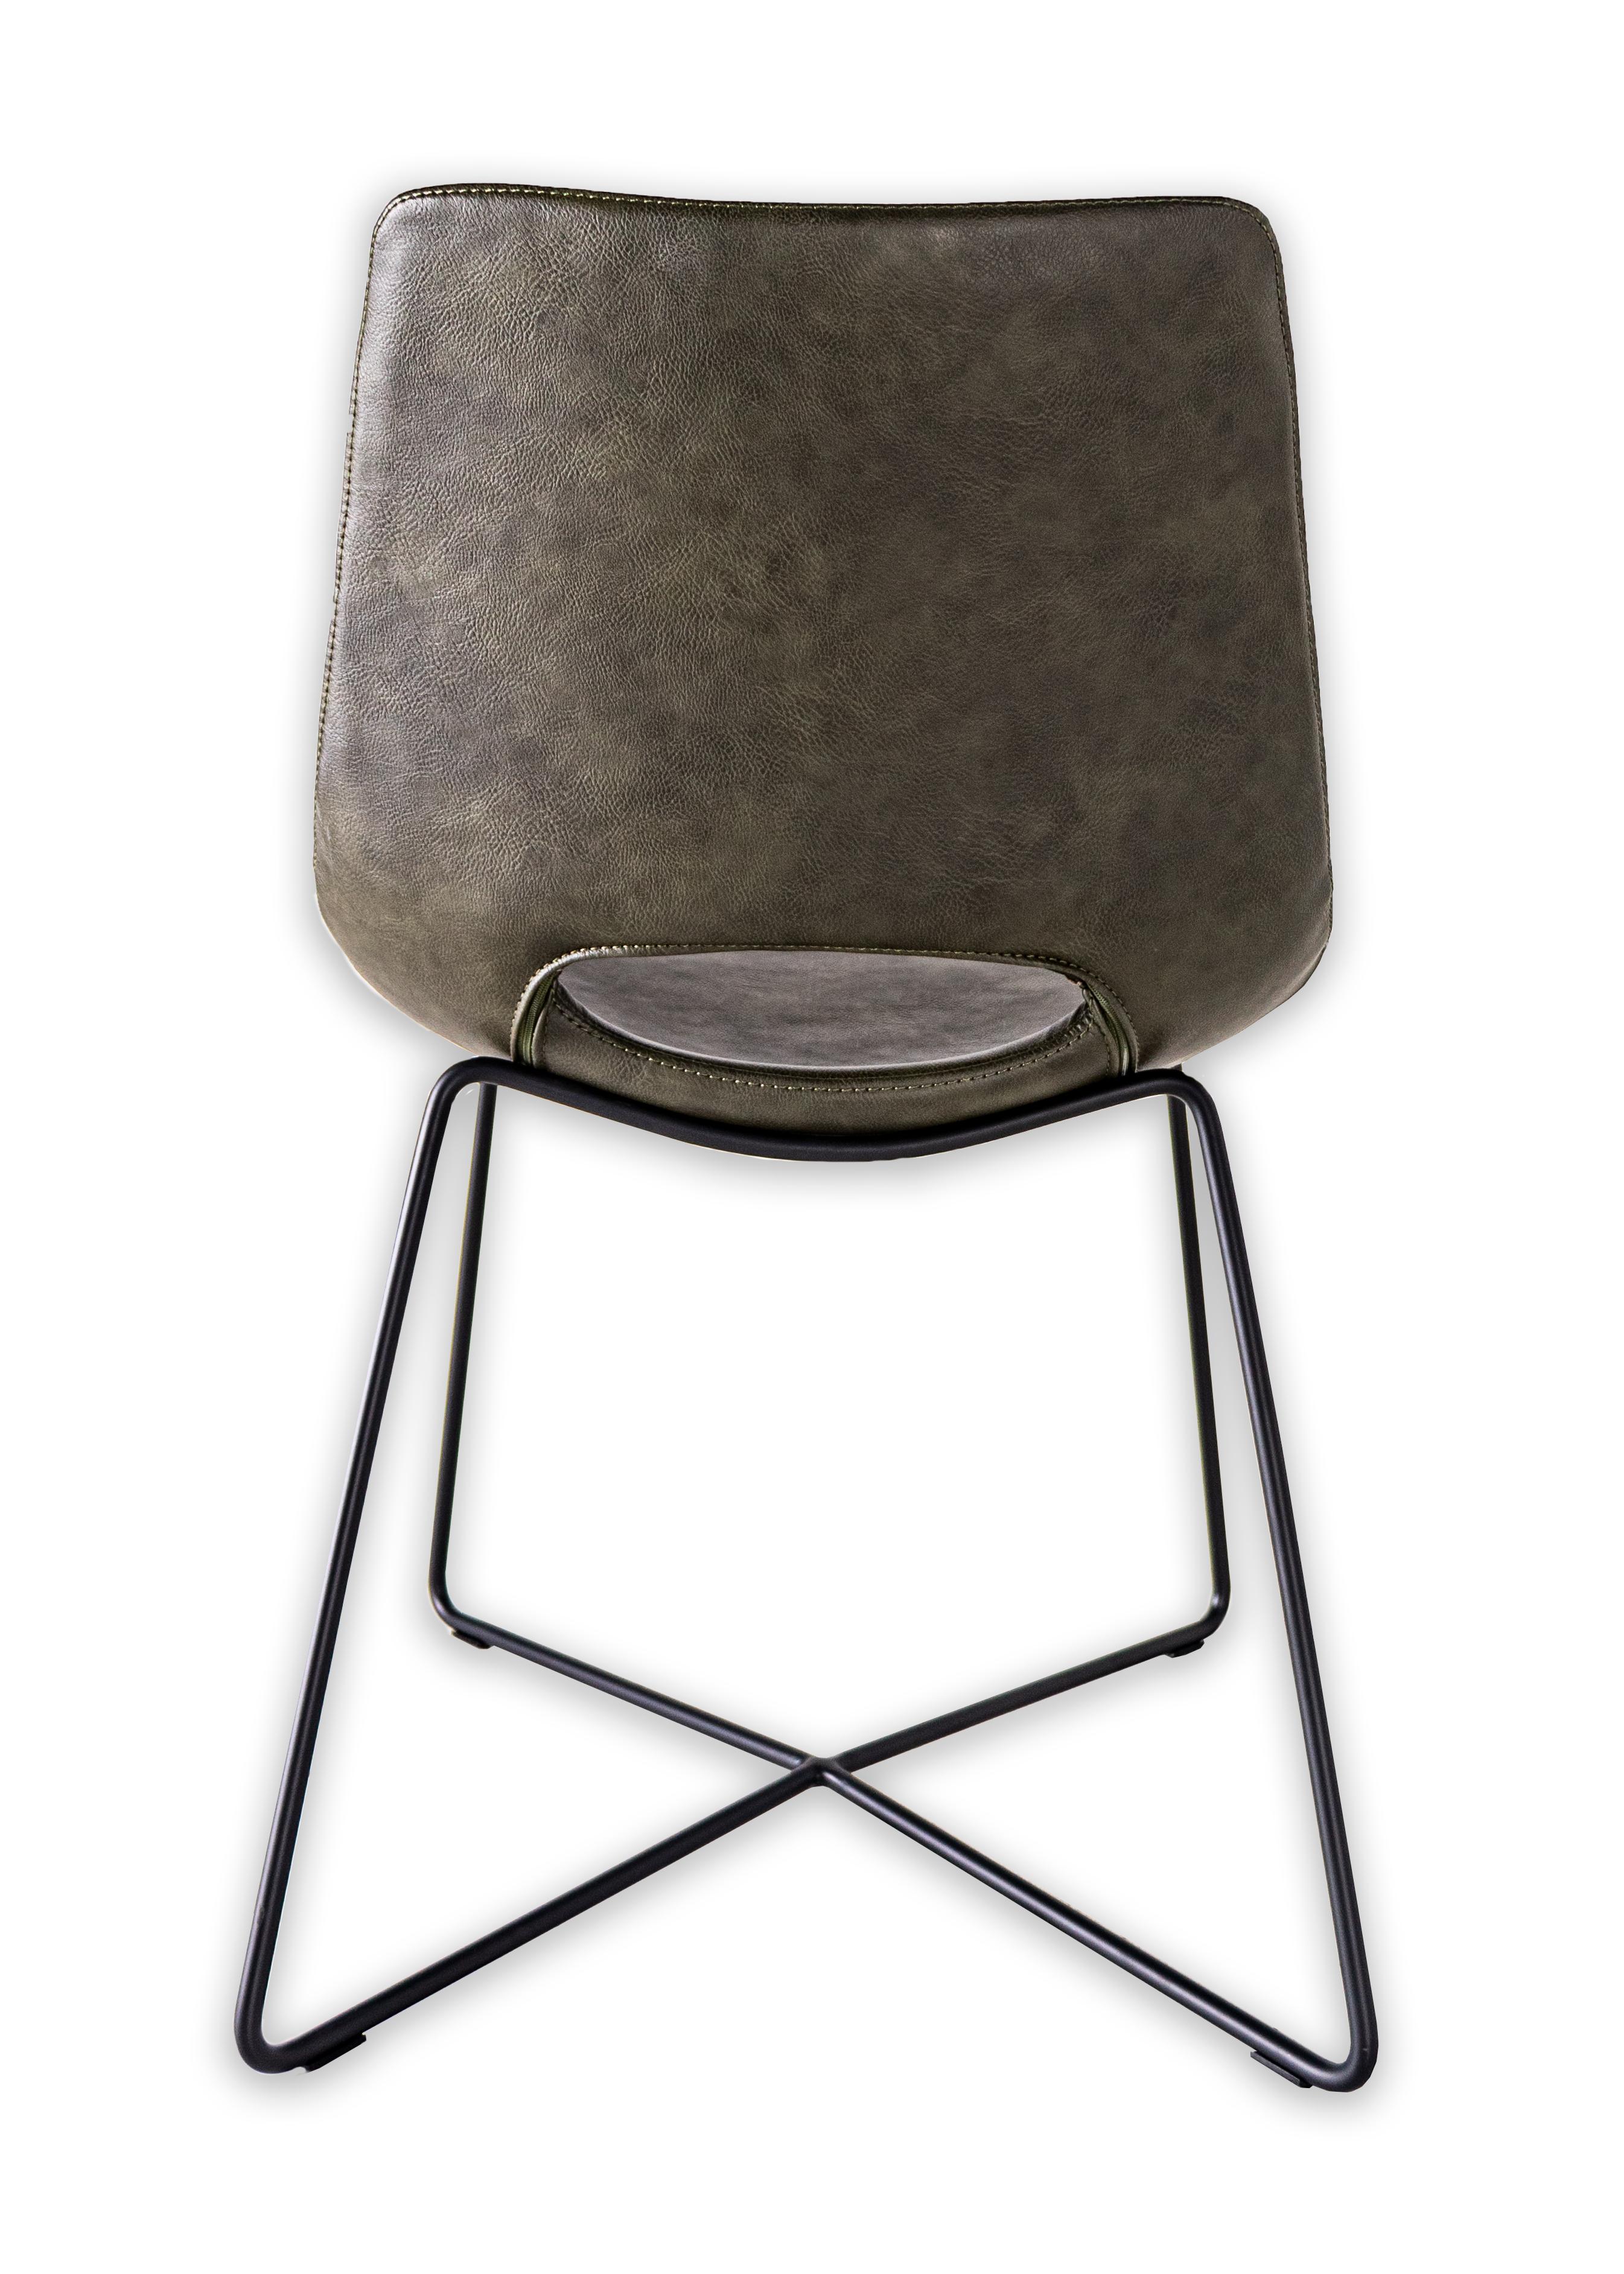 Contemporary Modern Leather Dining Chair For Sale